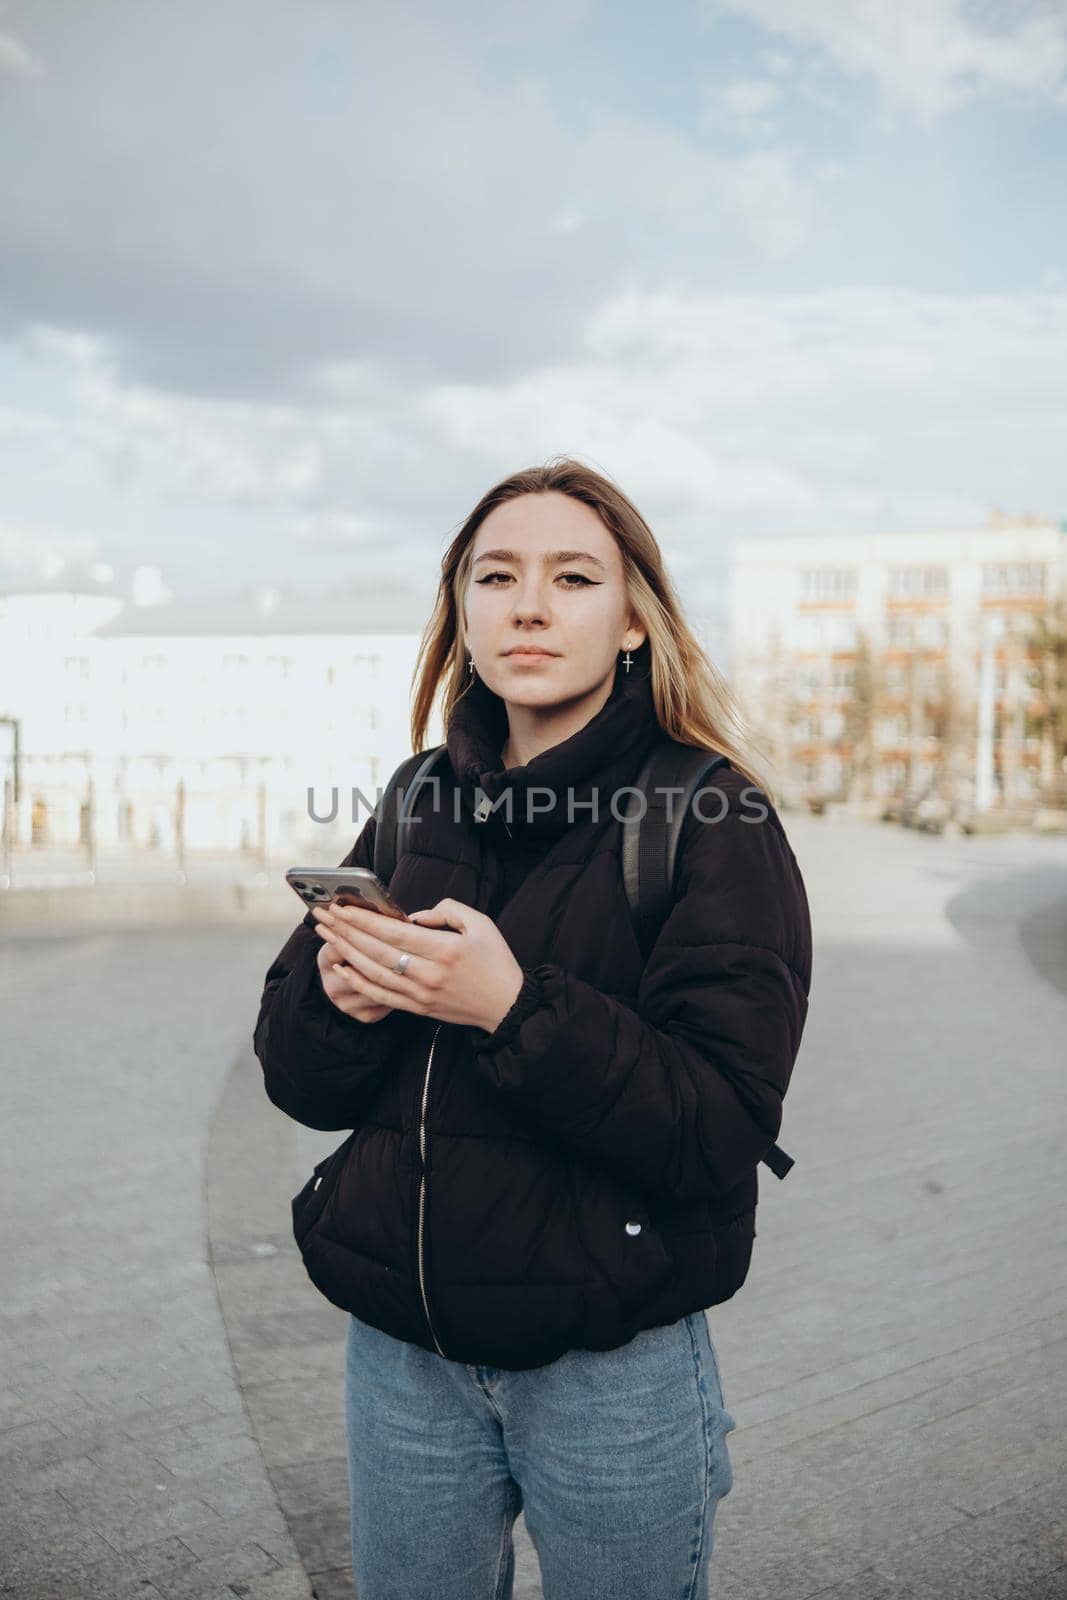 gorgeous beautiful young woman with blonde hair messaging on the smart-phone at the city street background. pretty girl having smart phone conversation in sun flare.